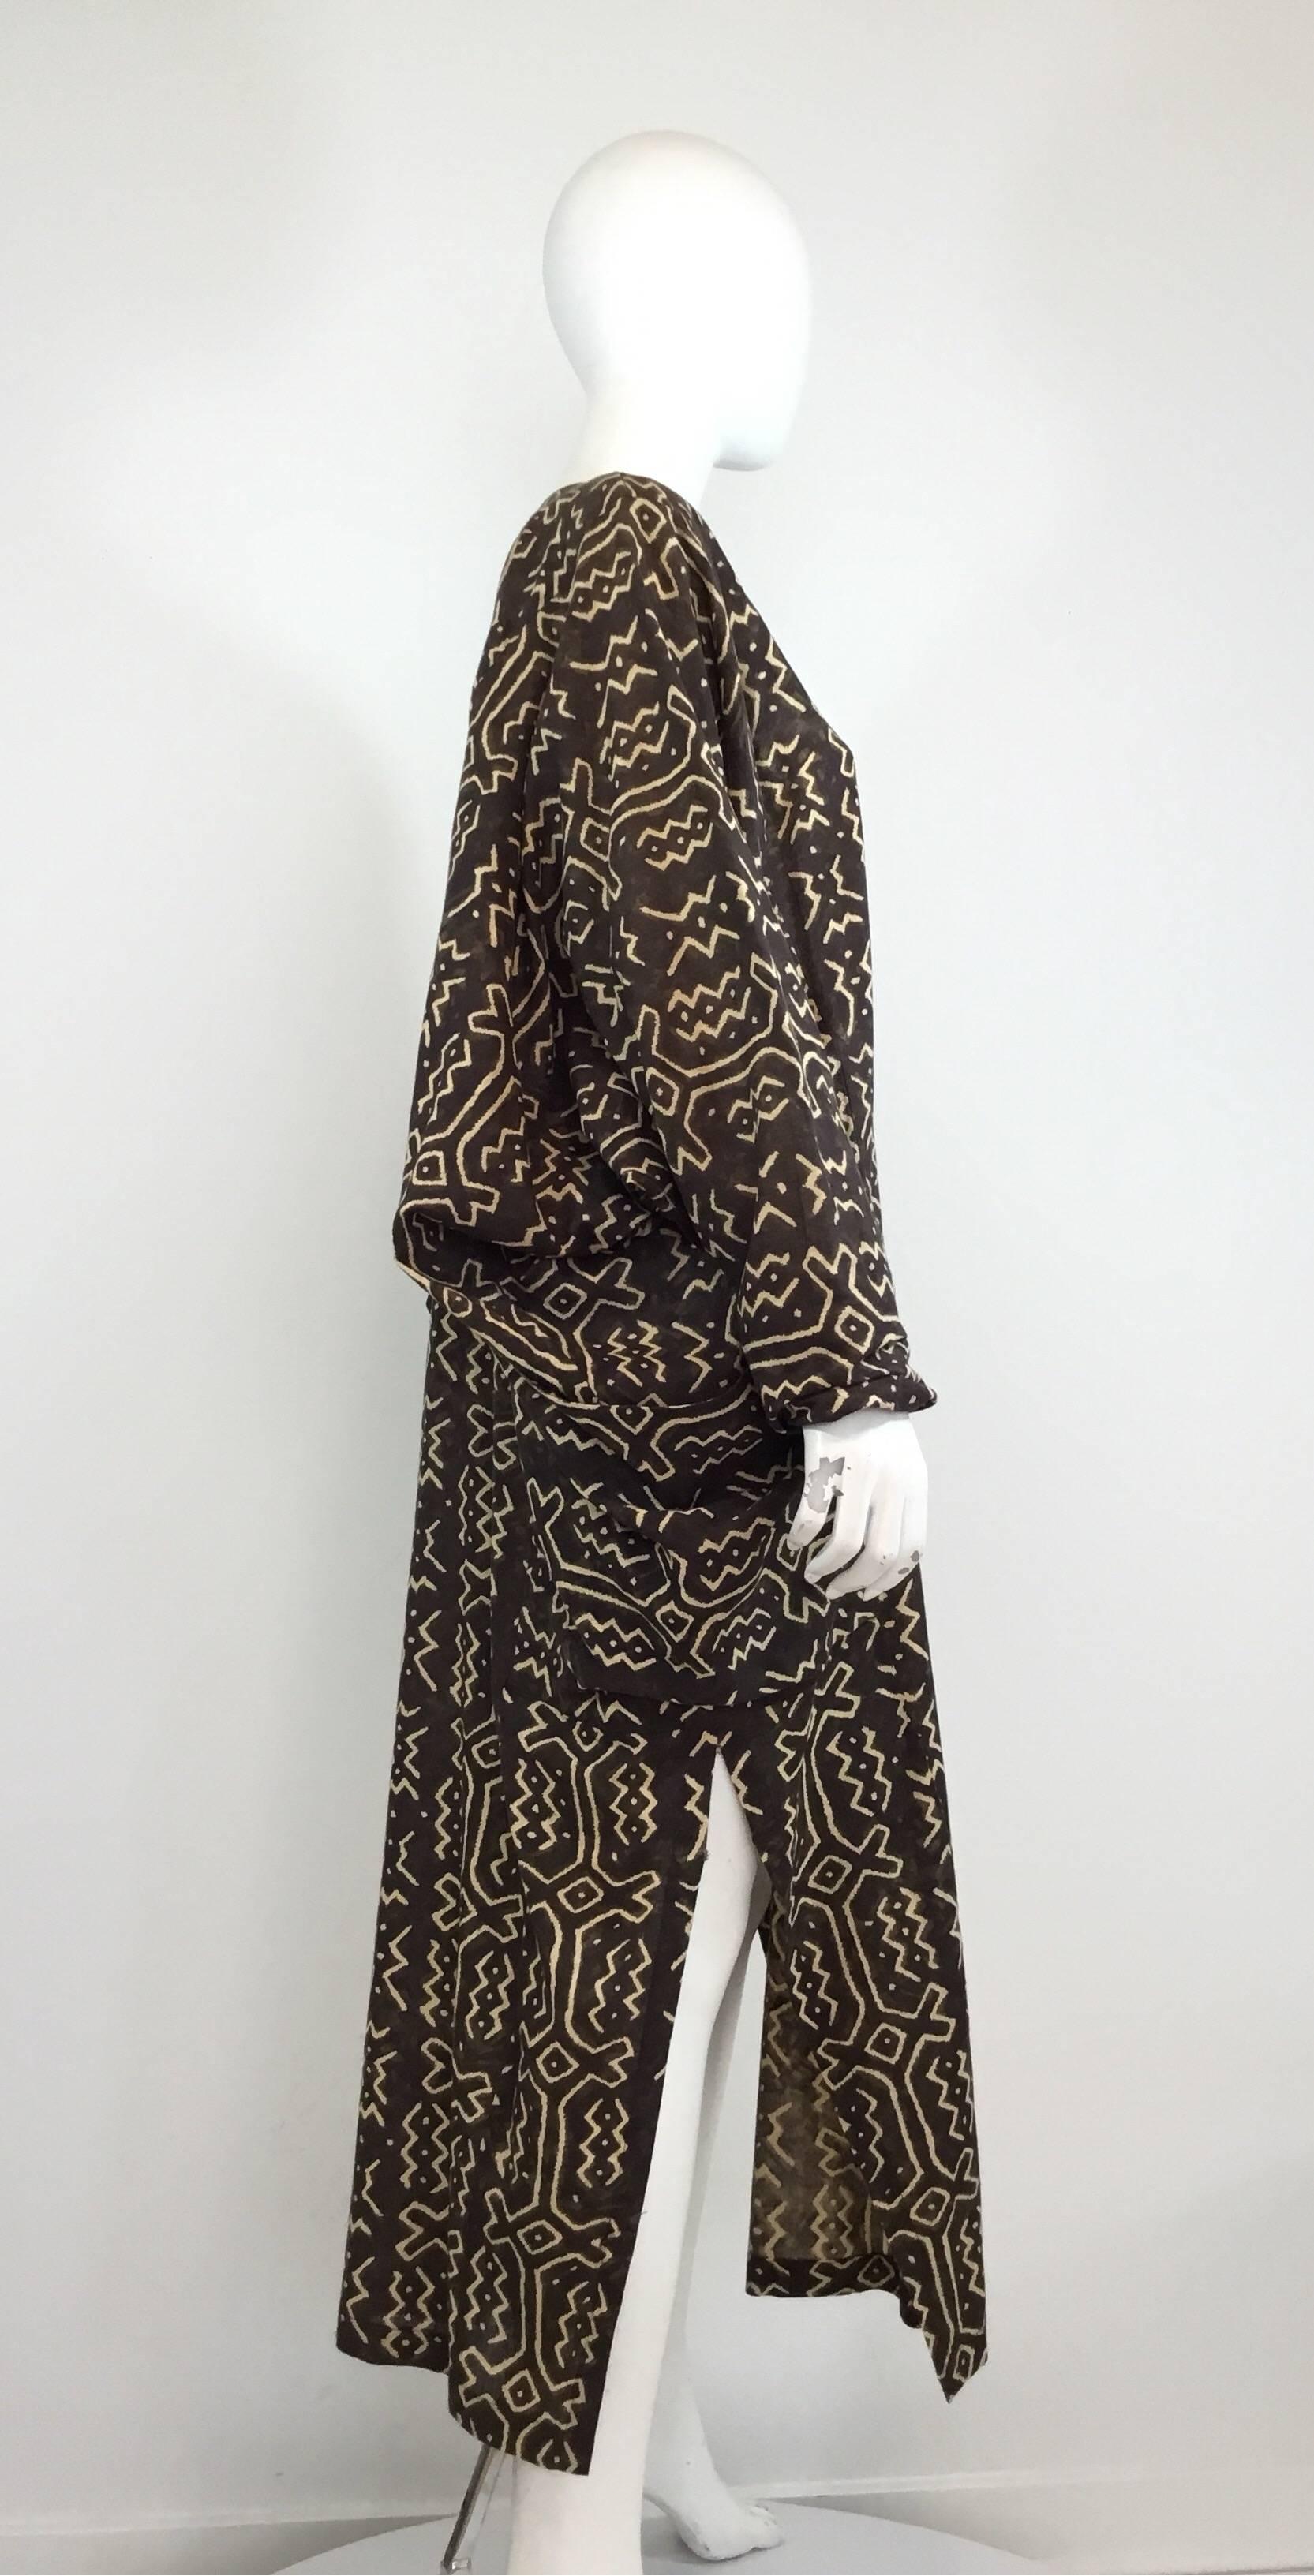 Norma Kamali caftan featured in brown and beige cotton with a tribal print throughout. Caftan has dramatic, oversized dolman sleeves and large pouch pockets at the hips. Labeled size M. Measurements: bust 66'', sleeves 32'', waist 68'', length